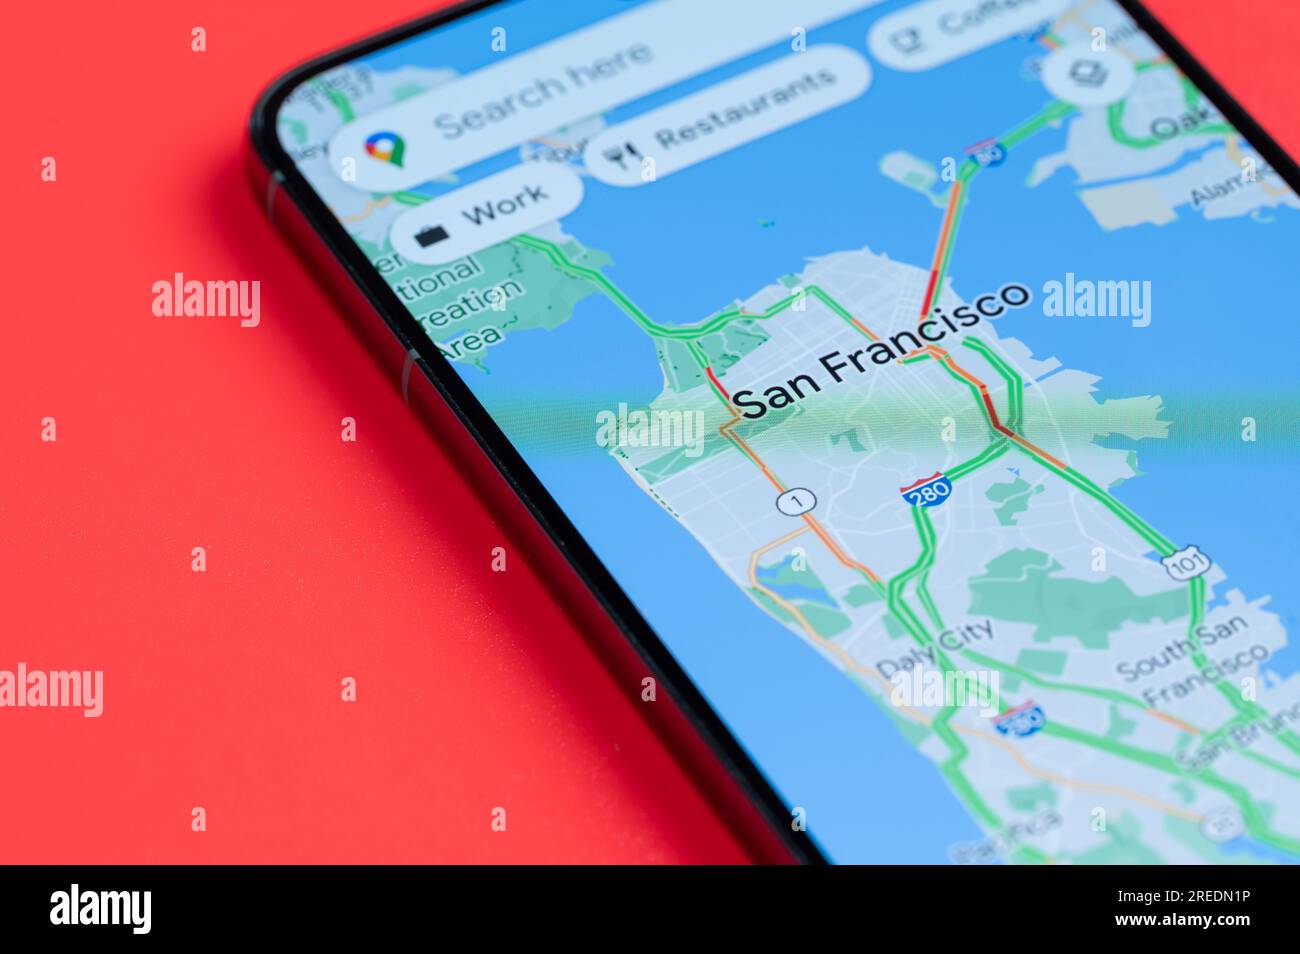 New York, USA - July 21, 2023: Car traffic in San Francisco  on google maps in smartphone screen close up view Stock Photo